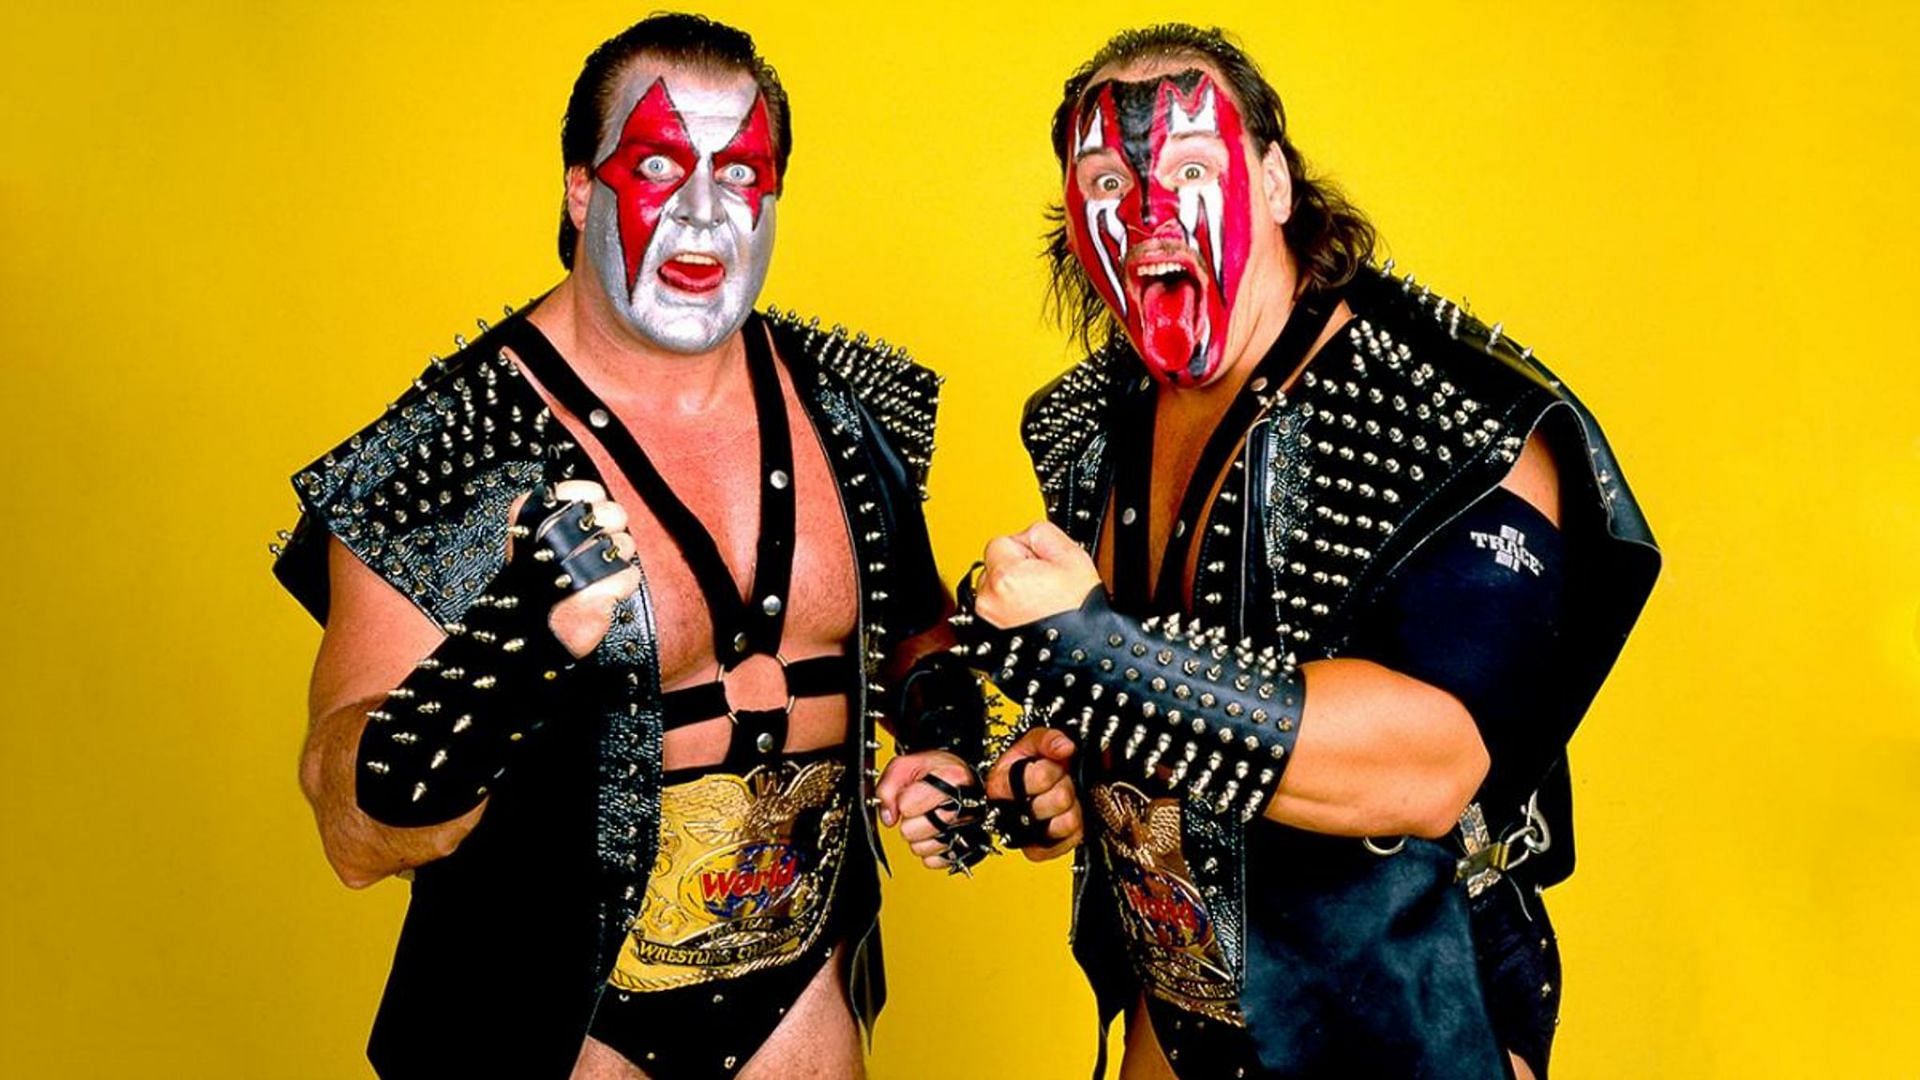 Ax and Smash are long overdue to be inducted into the WWE HOF.